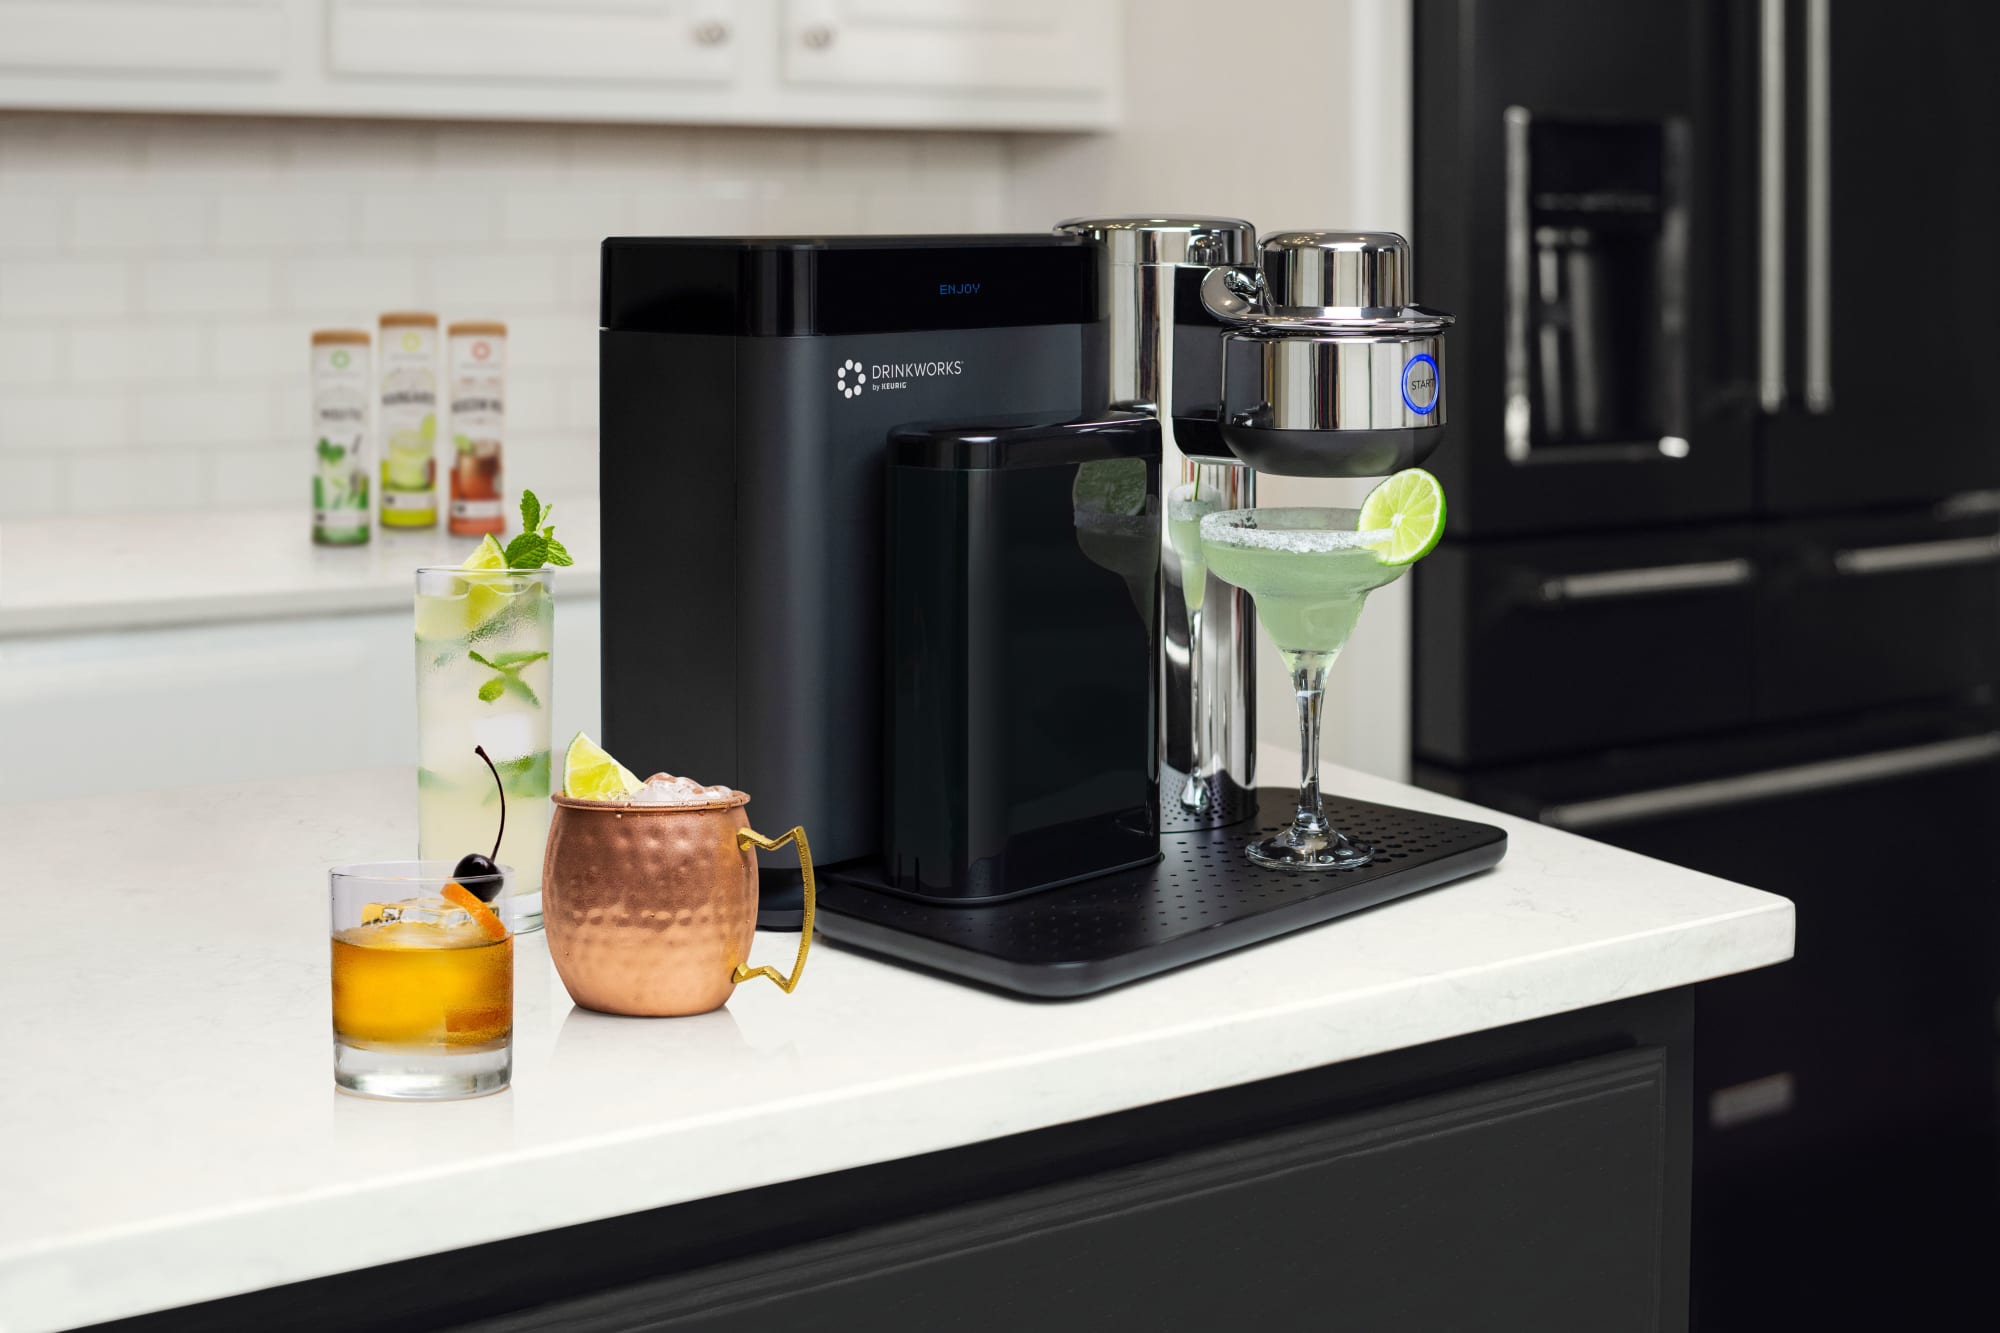 drinkworks-home-bar-review-all-you-need-to-know-about-the-appliance